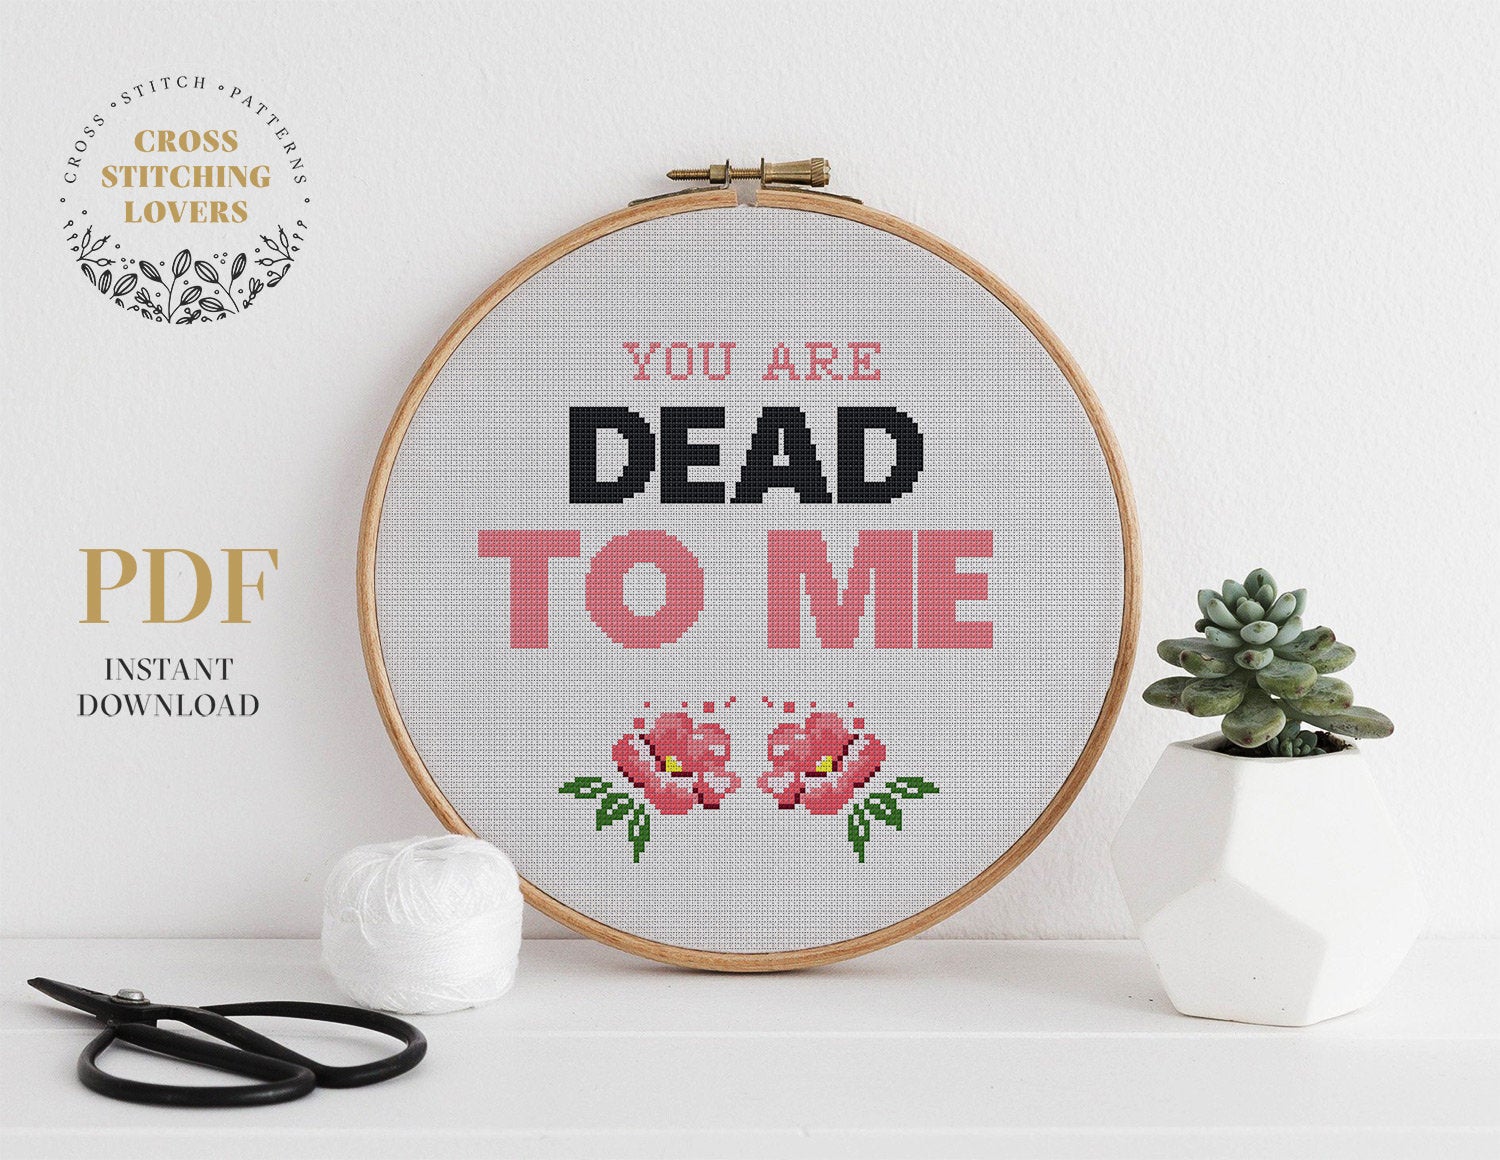 You are Dead To Me - Cross stitch pattern